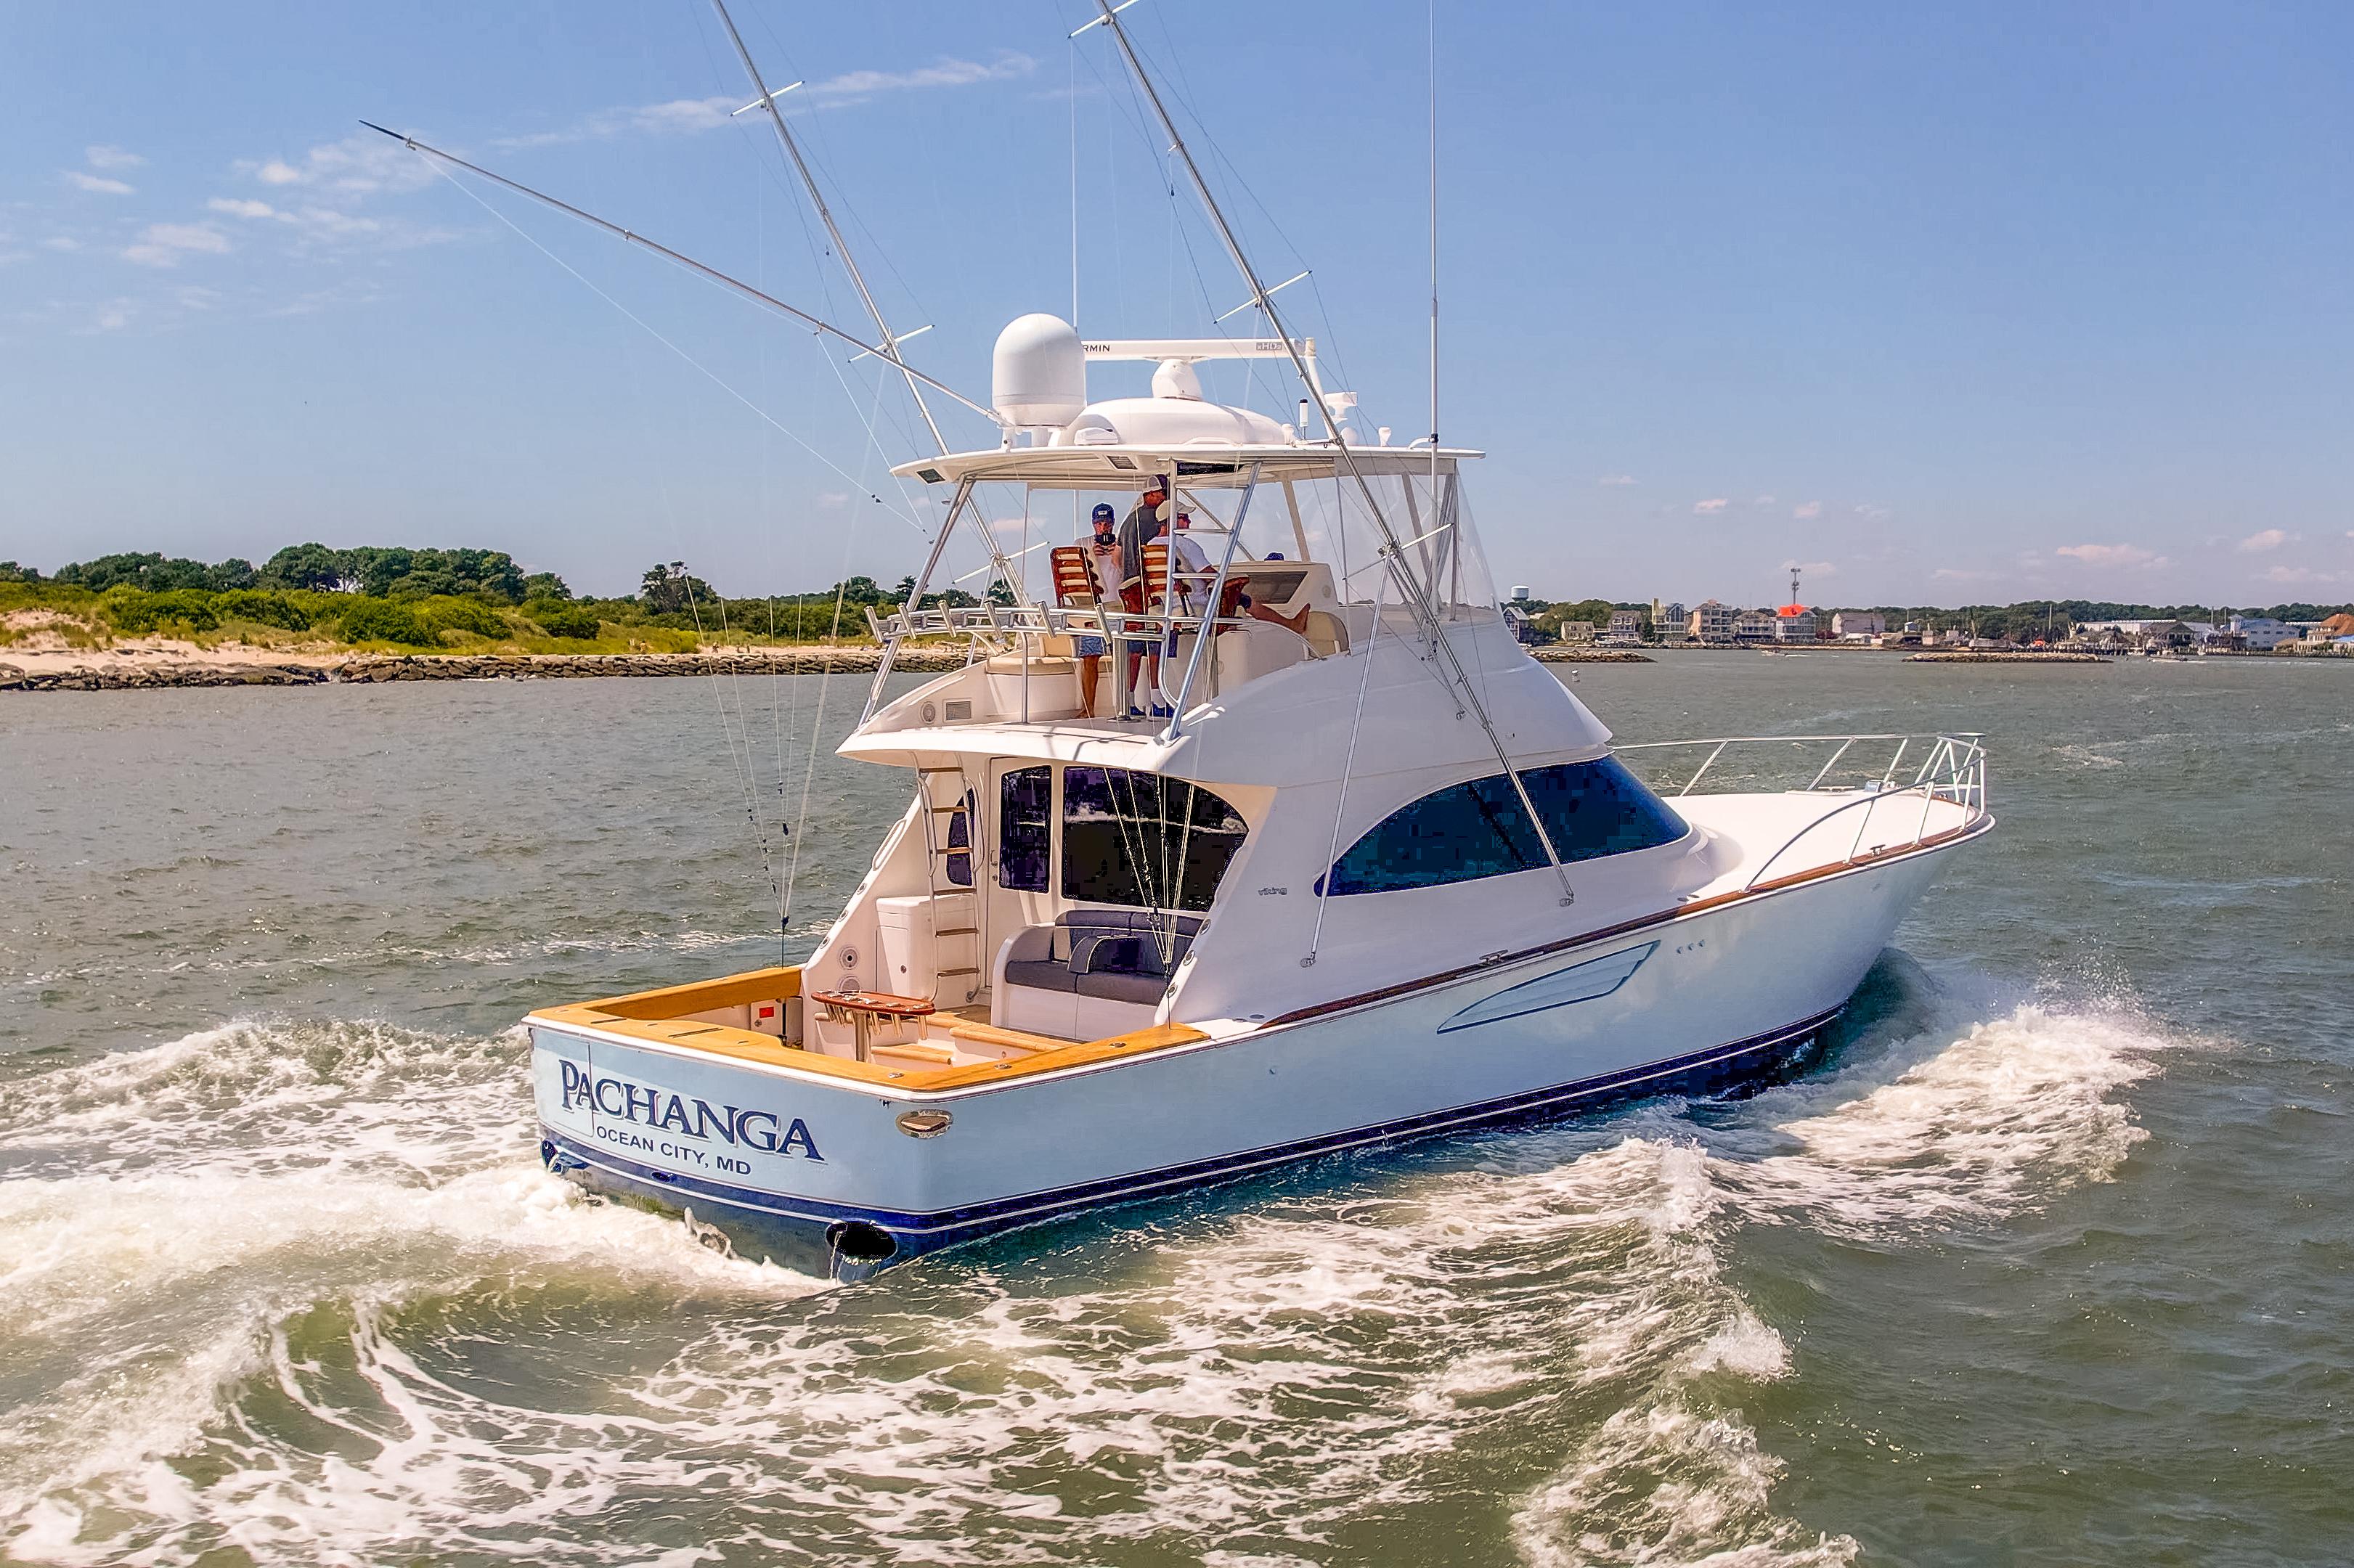 Pachanga Yacht for Sale  52 Viking Yachts West Ocean City, MD